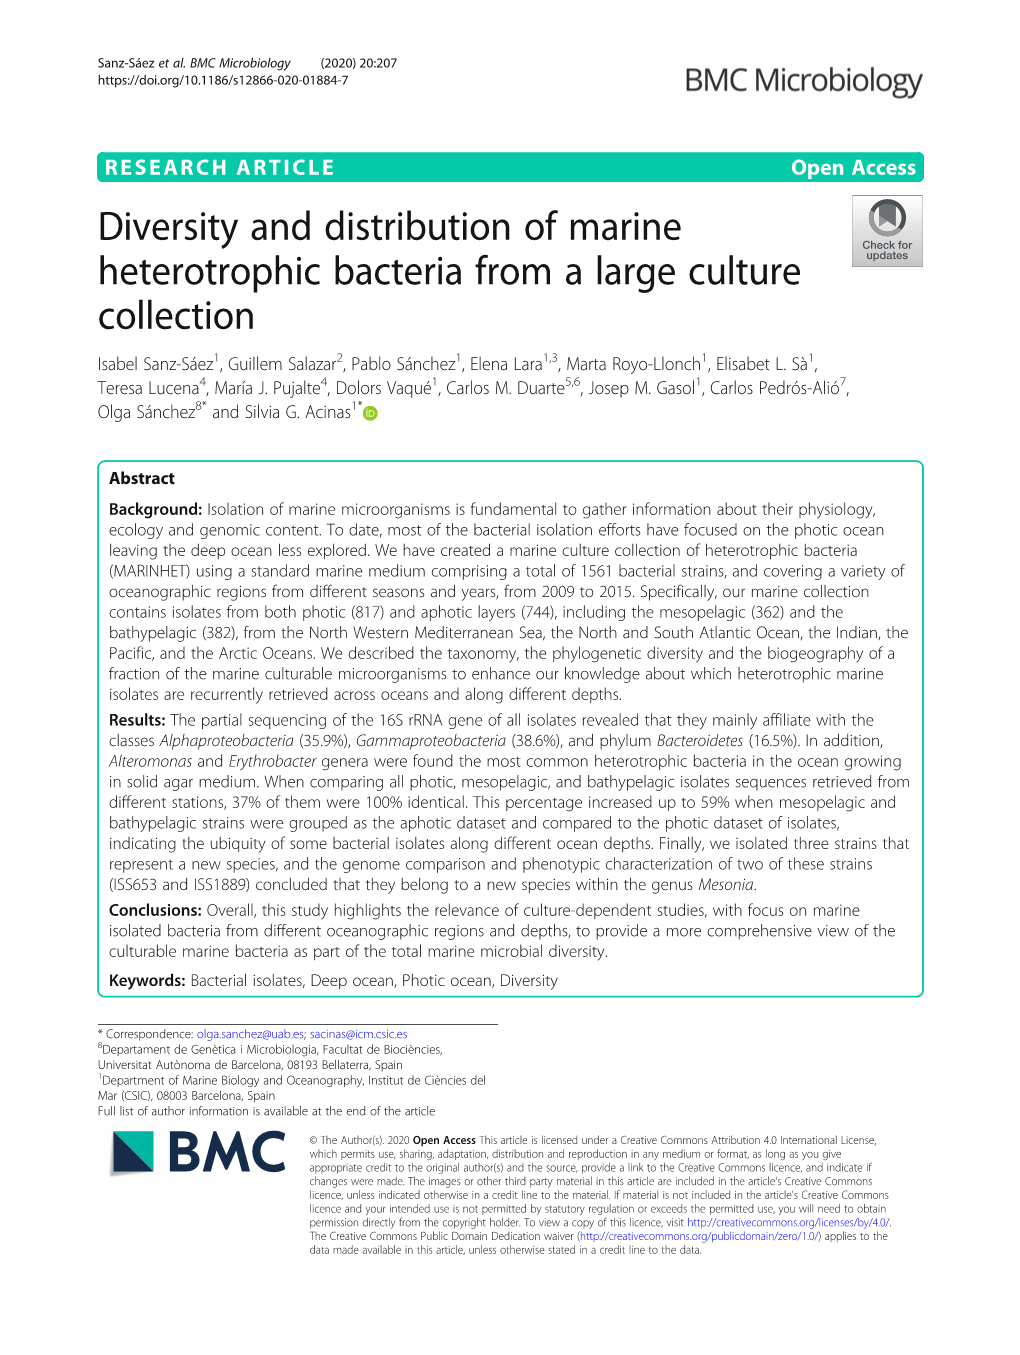 Diversity and Distribution of Marine Heterotrophic Bacteria from a Large